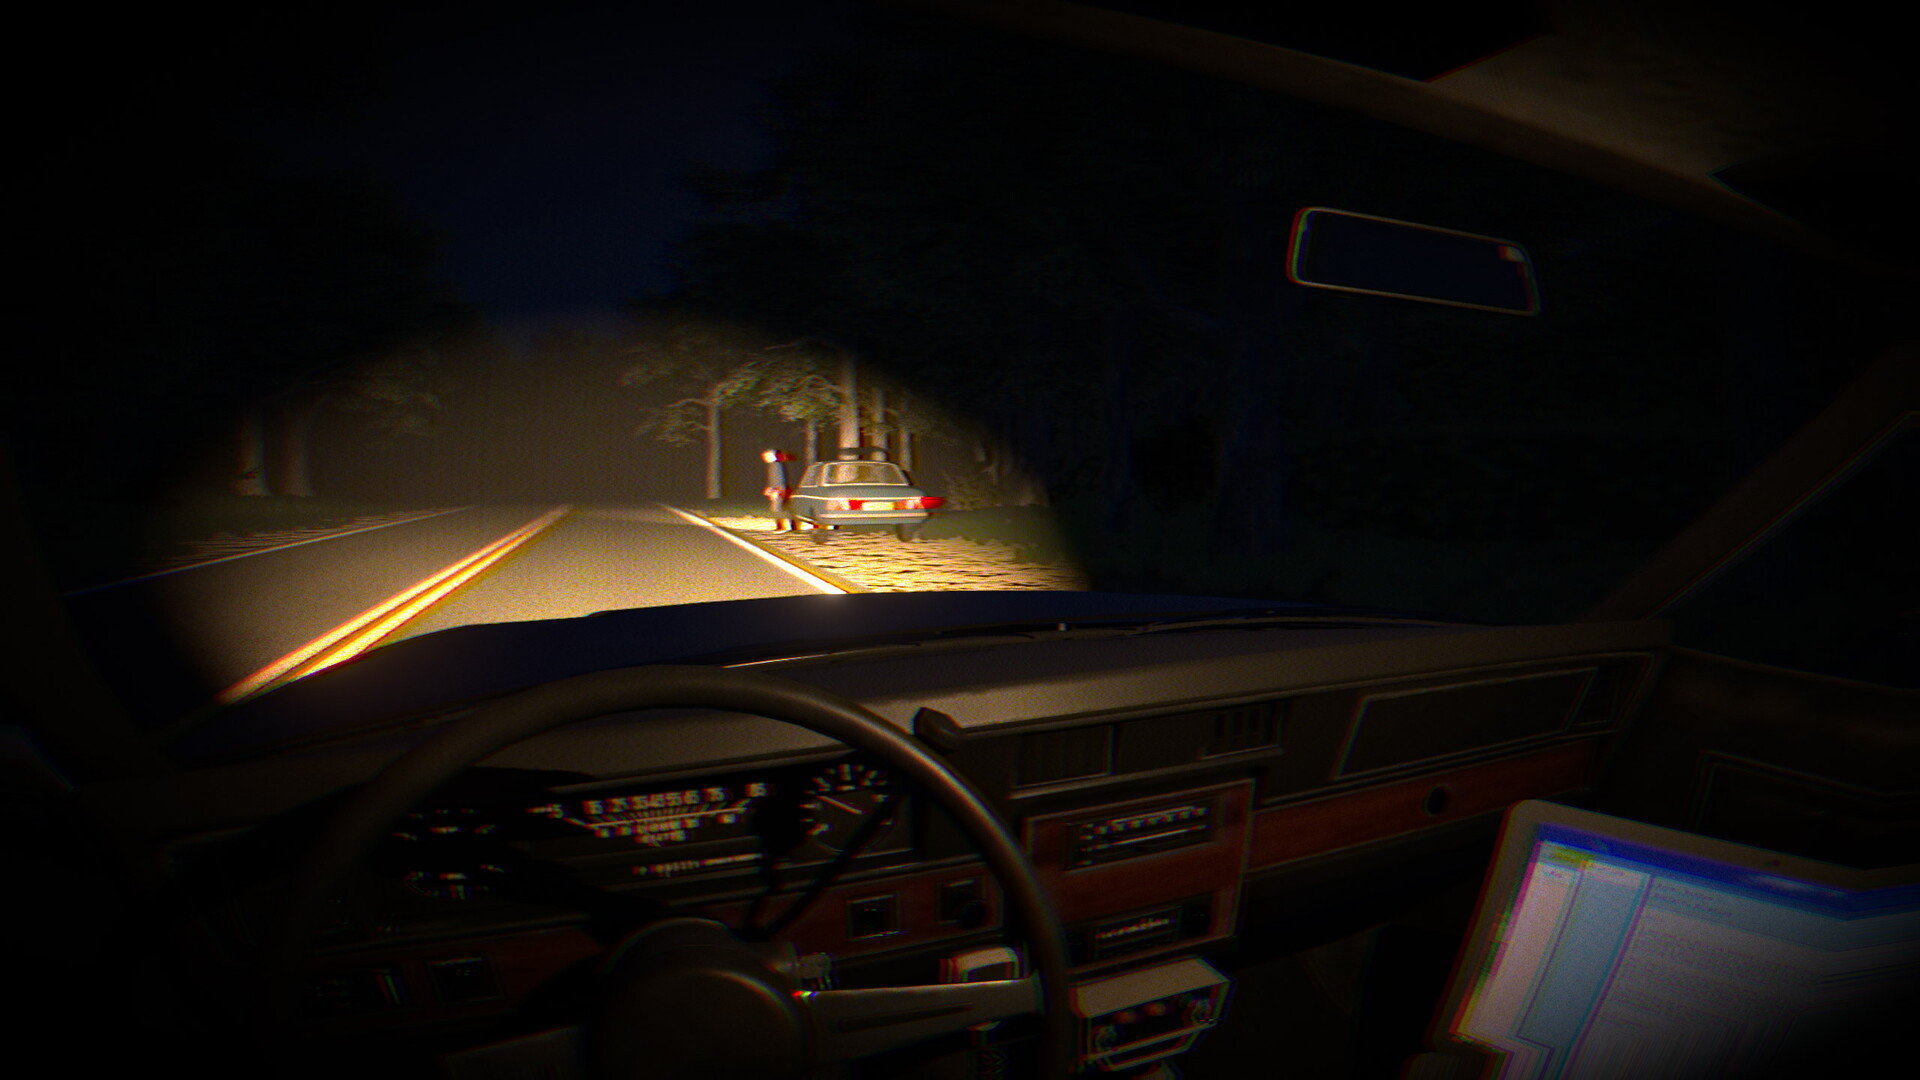 The horror, which has received almost entirely positive reviews, is available for free on Steam